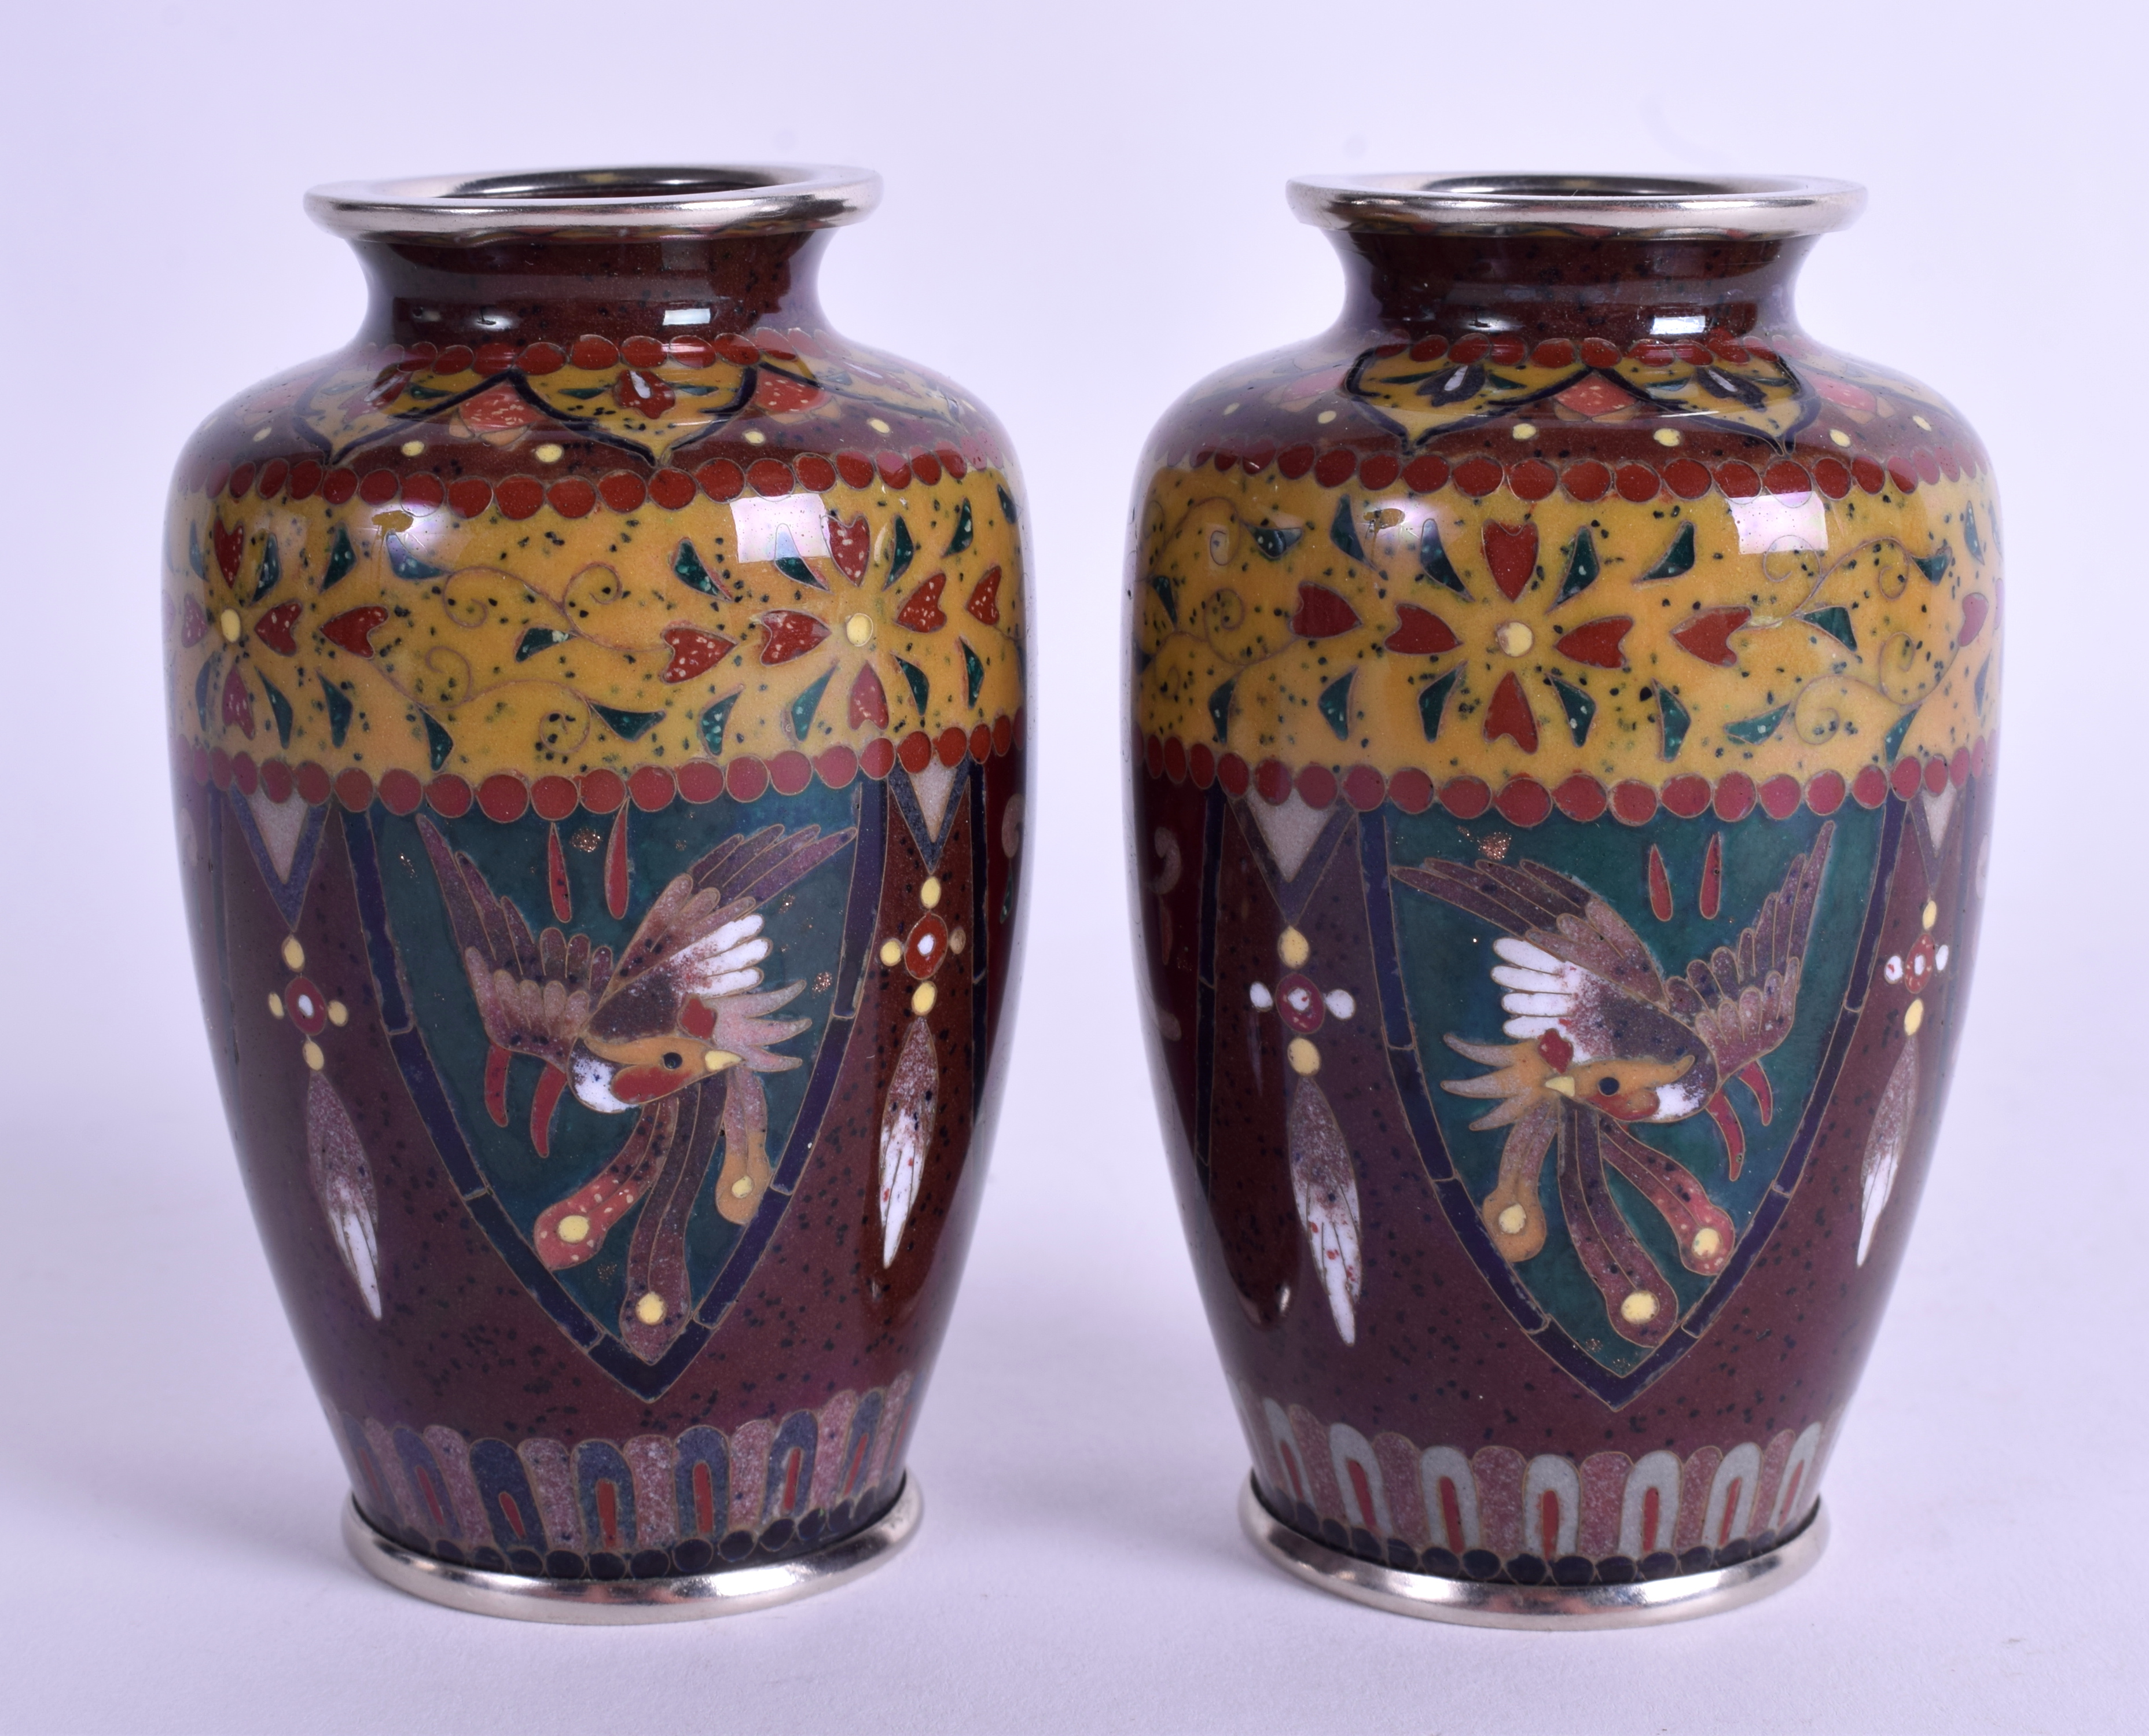 A PAIR OF EARLY 20TH CENTURY JAPANESE MEIJI PERIOD SILVER CLOISONNÉ ENAMEL VASES. 9.75 cm high.